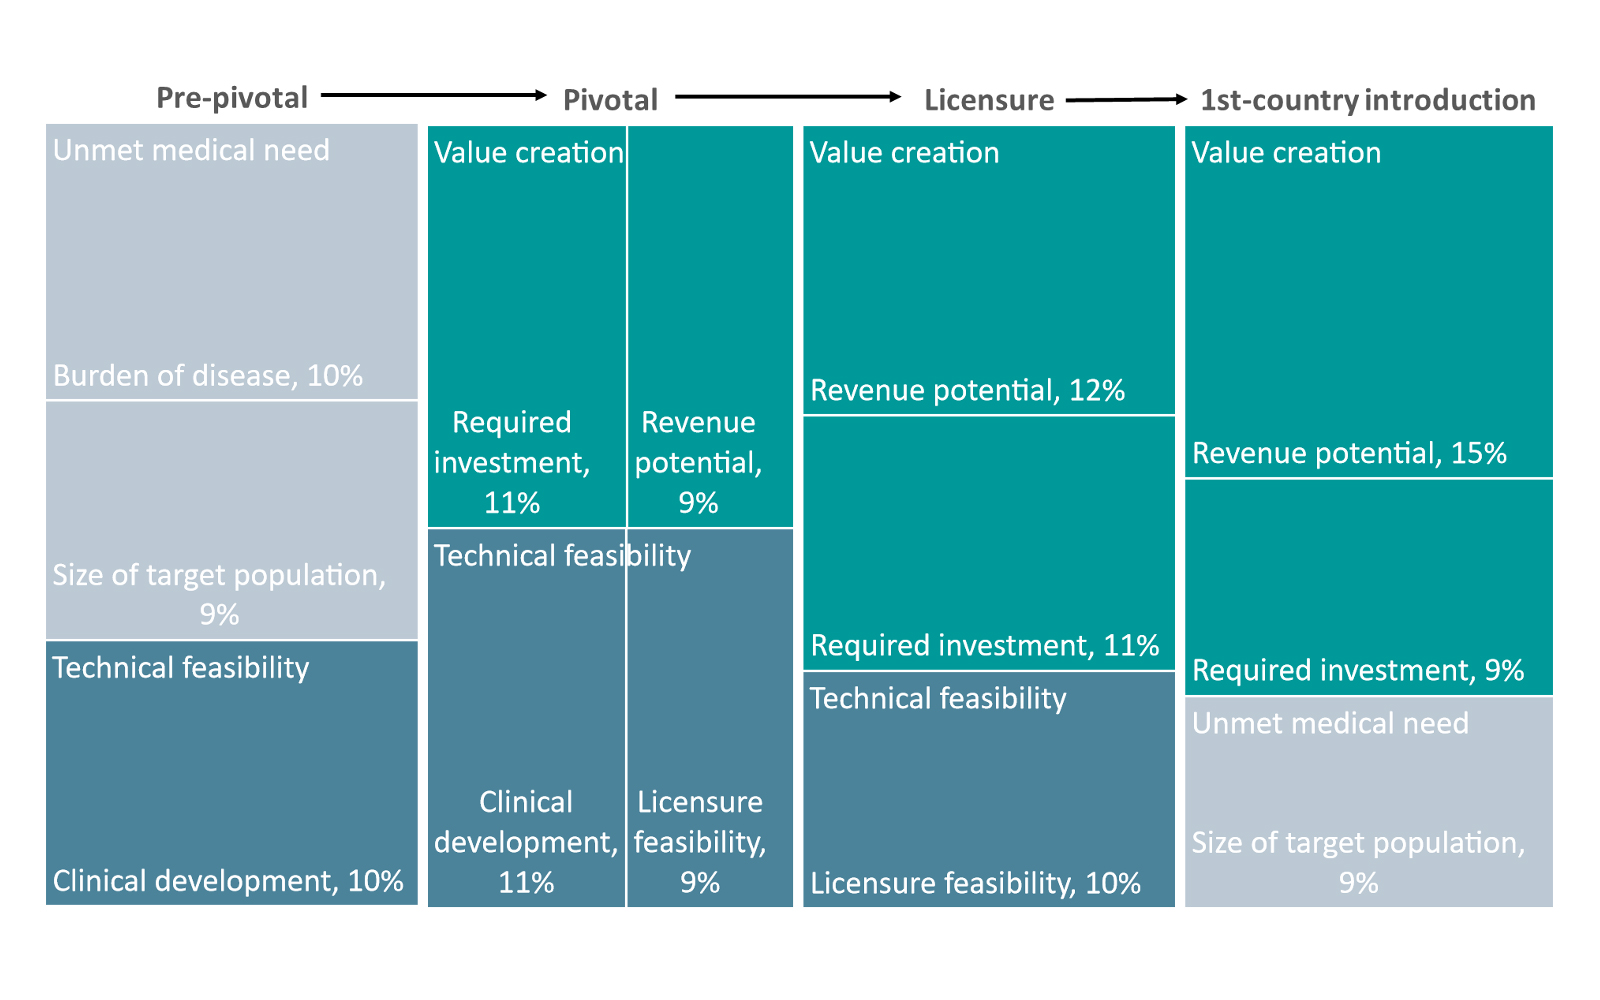 Figure 5. Leading decision making influences within each phase of development 
Note: These are the most important influences, but there are many others, explaining why the percentages do not add up to 100%.
Source: MMGH Consulting for the Wellcome Trust, 2020
